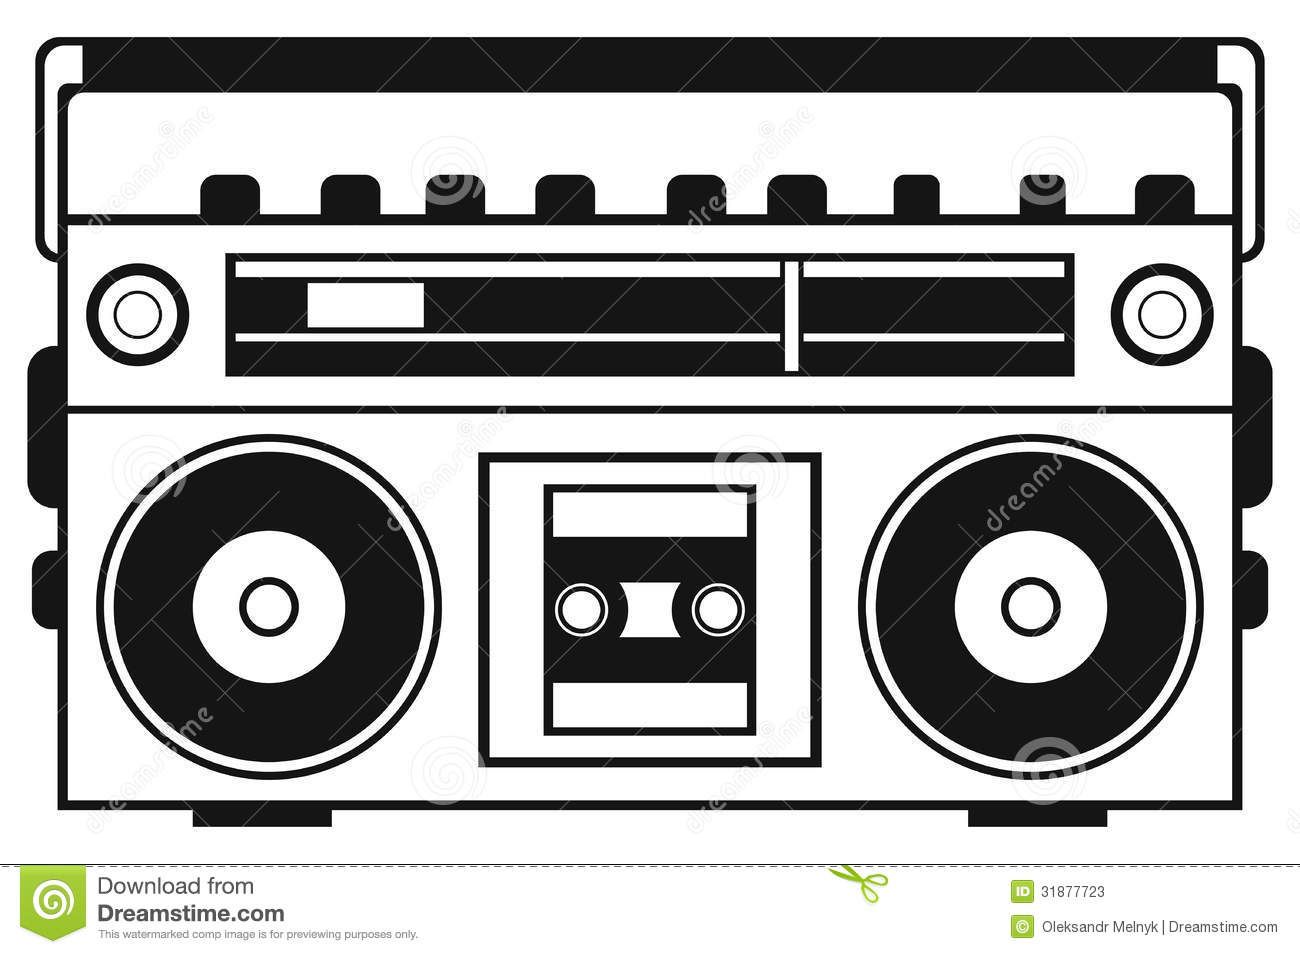 Boombox clipart repinlikeview.